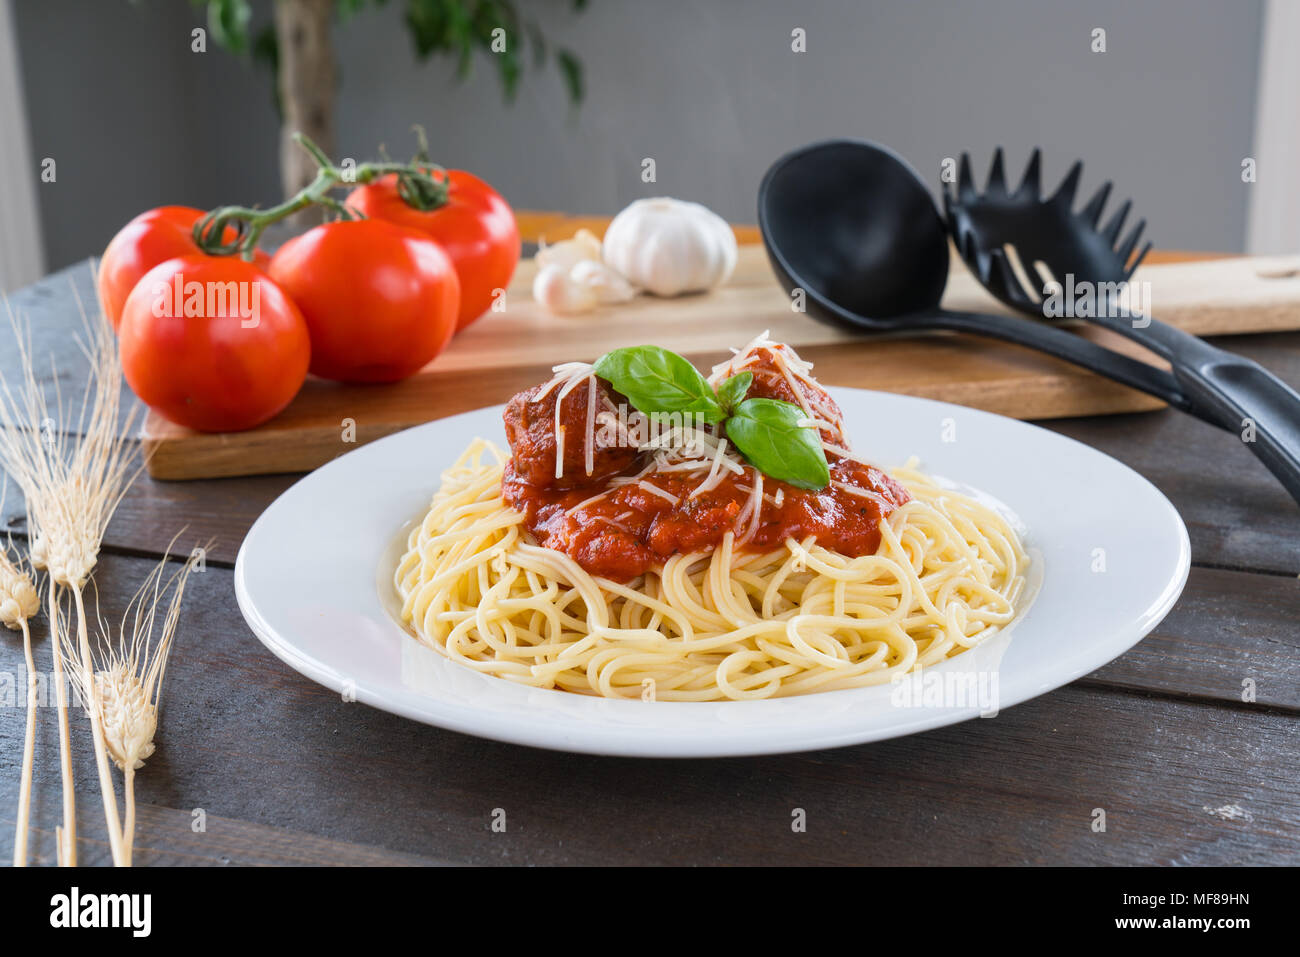 Plate of Spaghetti with tomato sauce, meatballs and Basil Stock Photo